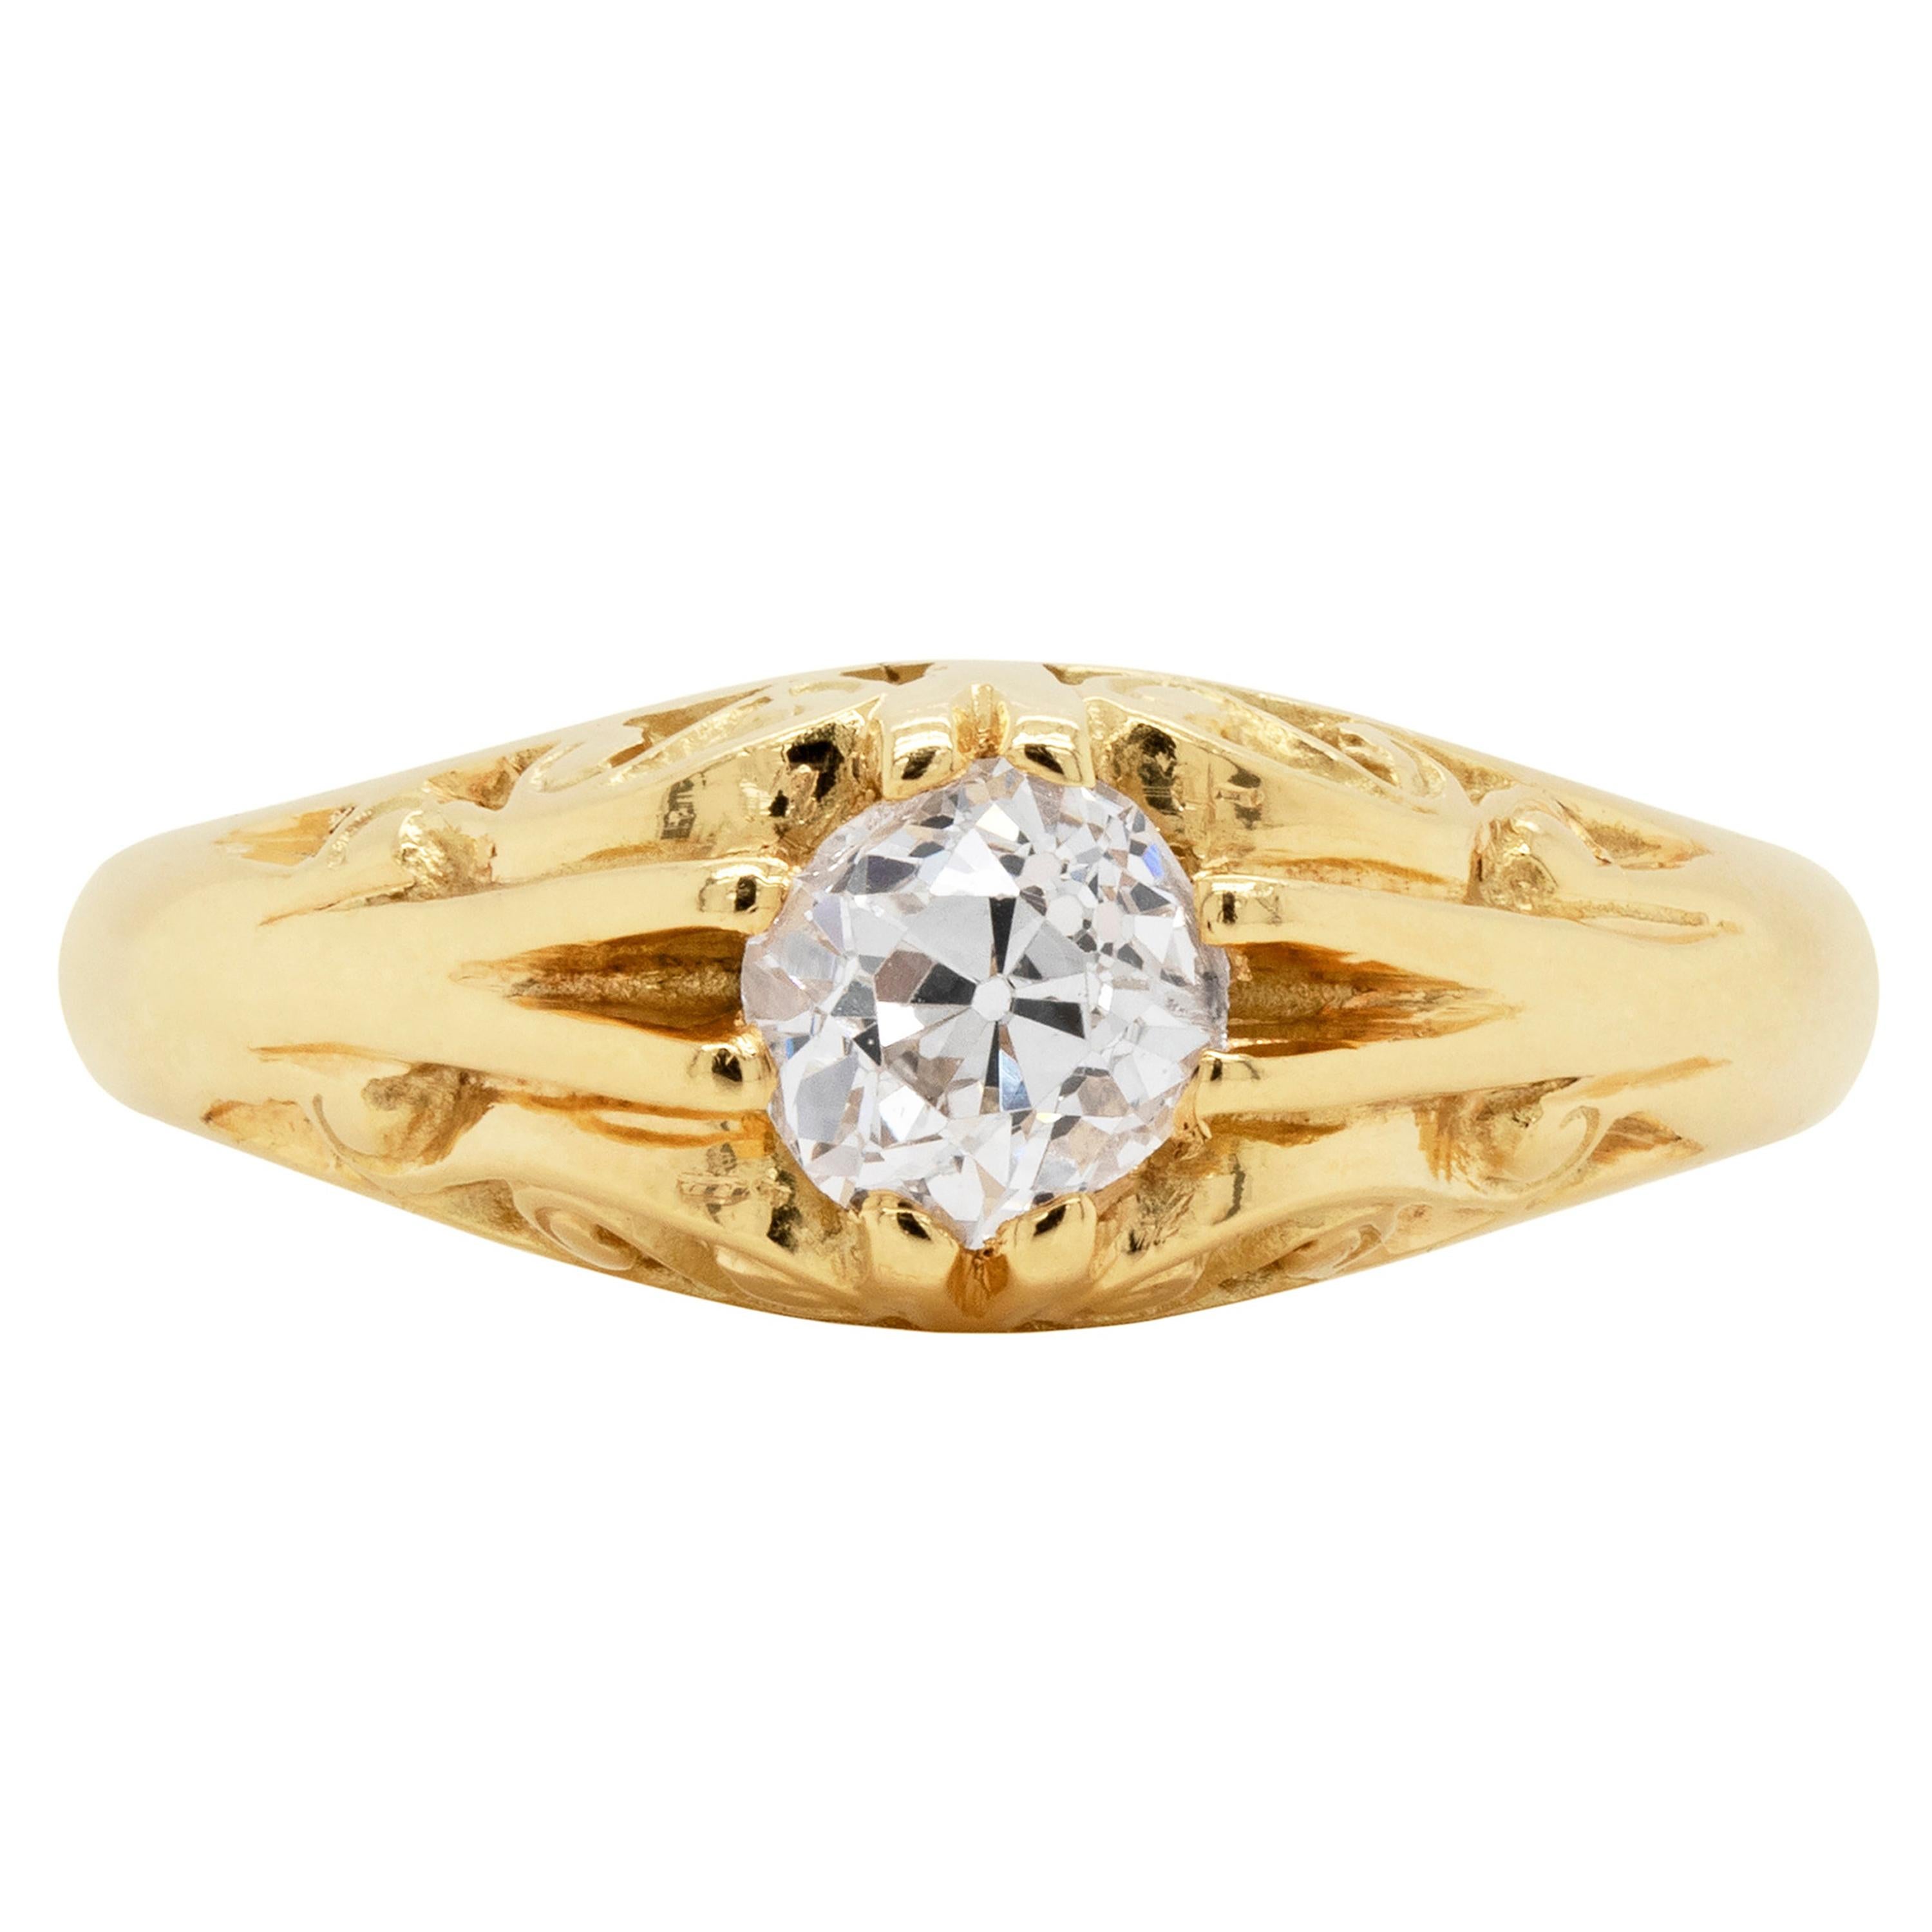 Old Cut Diamond 18 Carat Yellow Gold Carved Gypsy Gents Ring